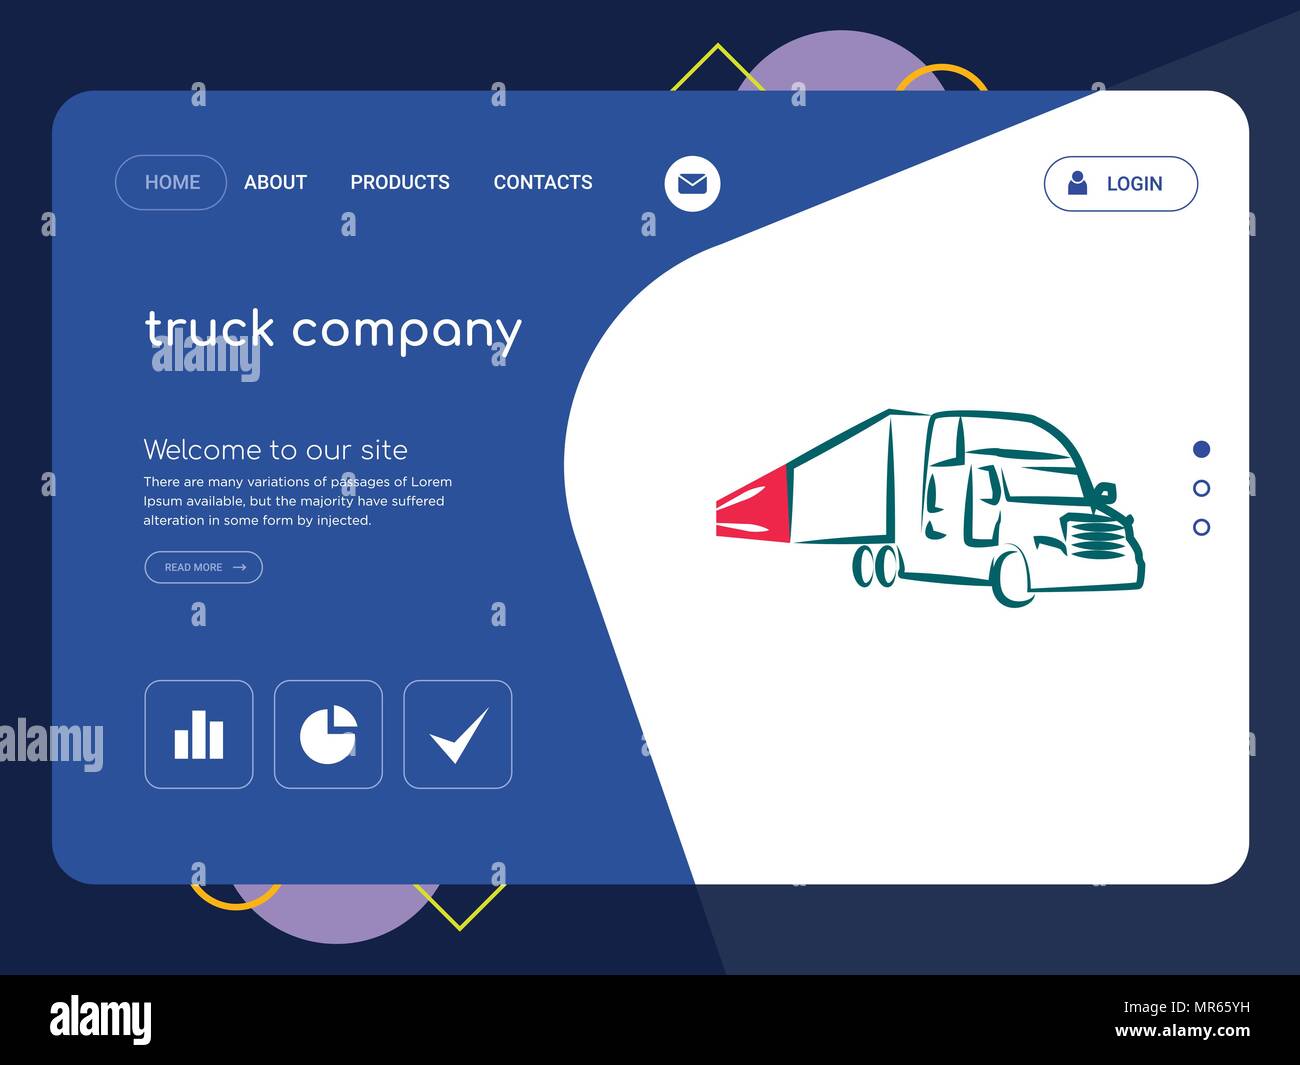 Trucking Company Website Template from c8.alamy.com